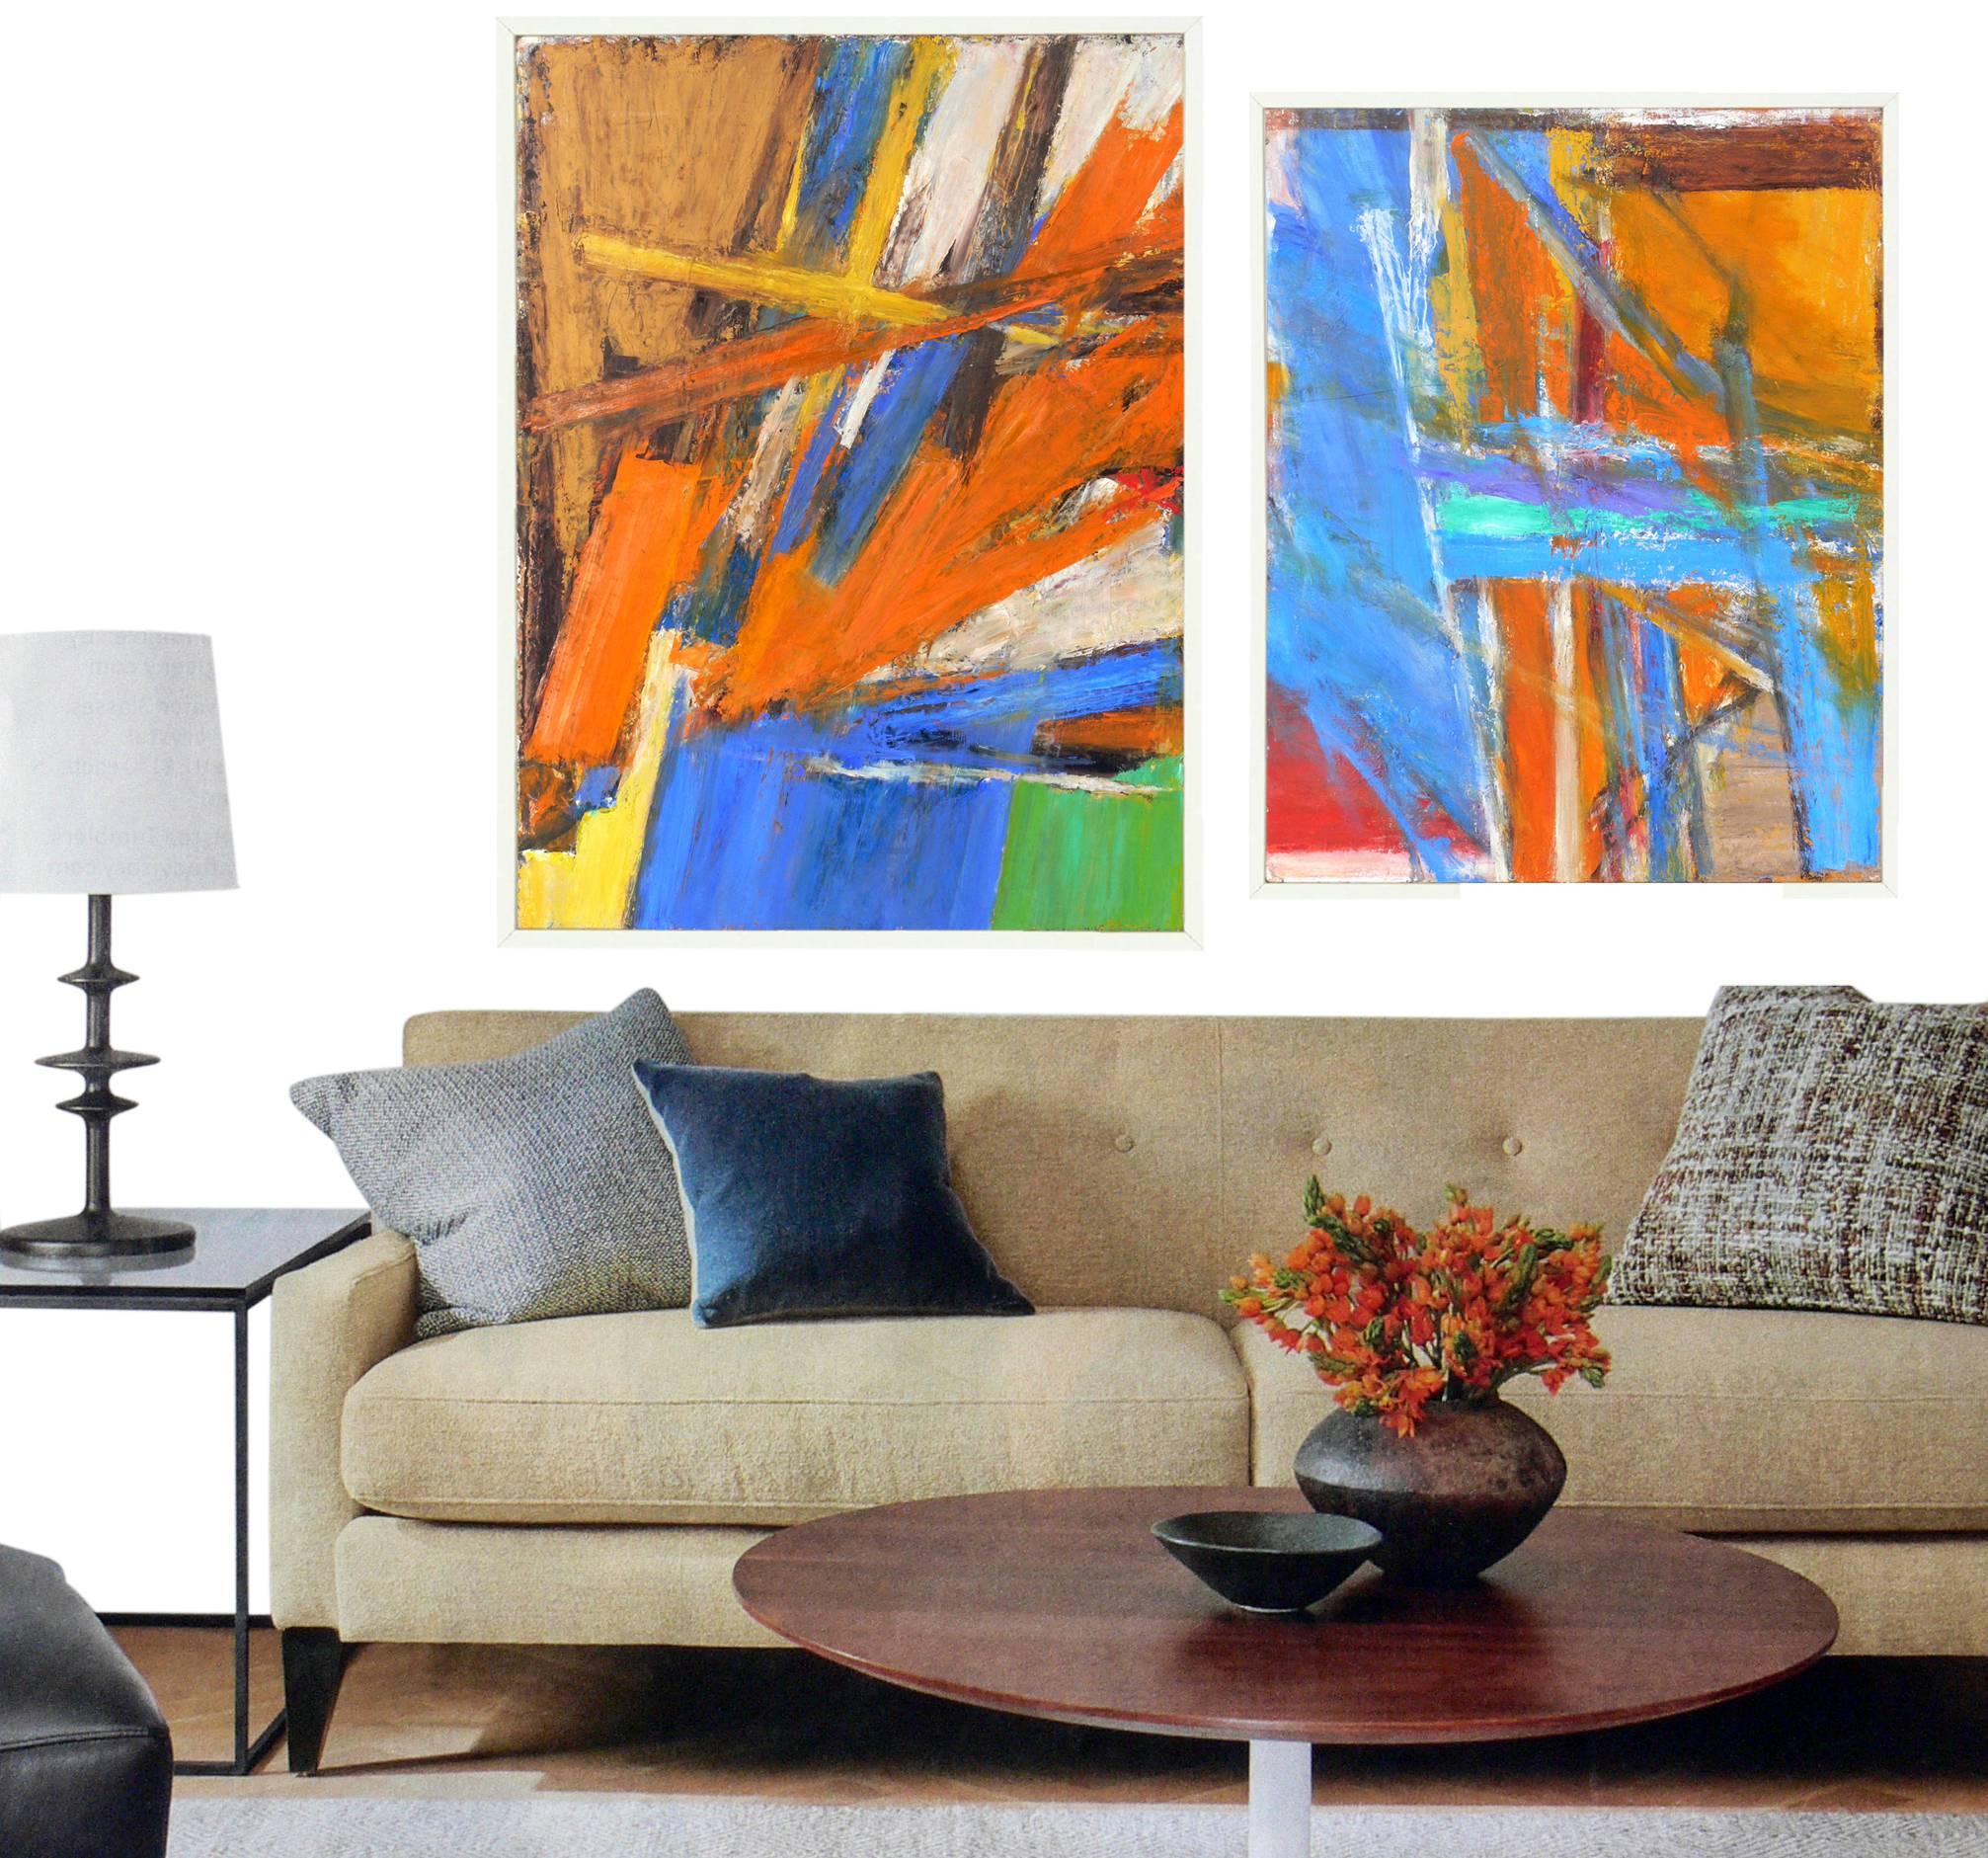 Pair of vibrant abstract paintings, artist unknown, American, circa 1970s. Thick impasto texture and vibrant colors. Professionally framed in clean lined white lacquered gallery frames. The painting pictured on the left measures 43.5